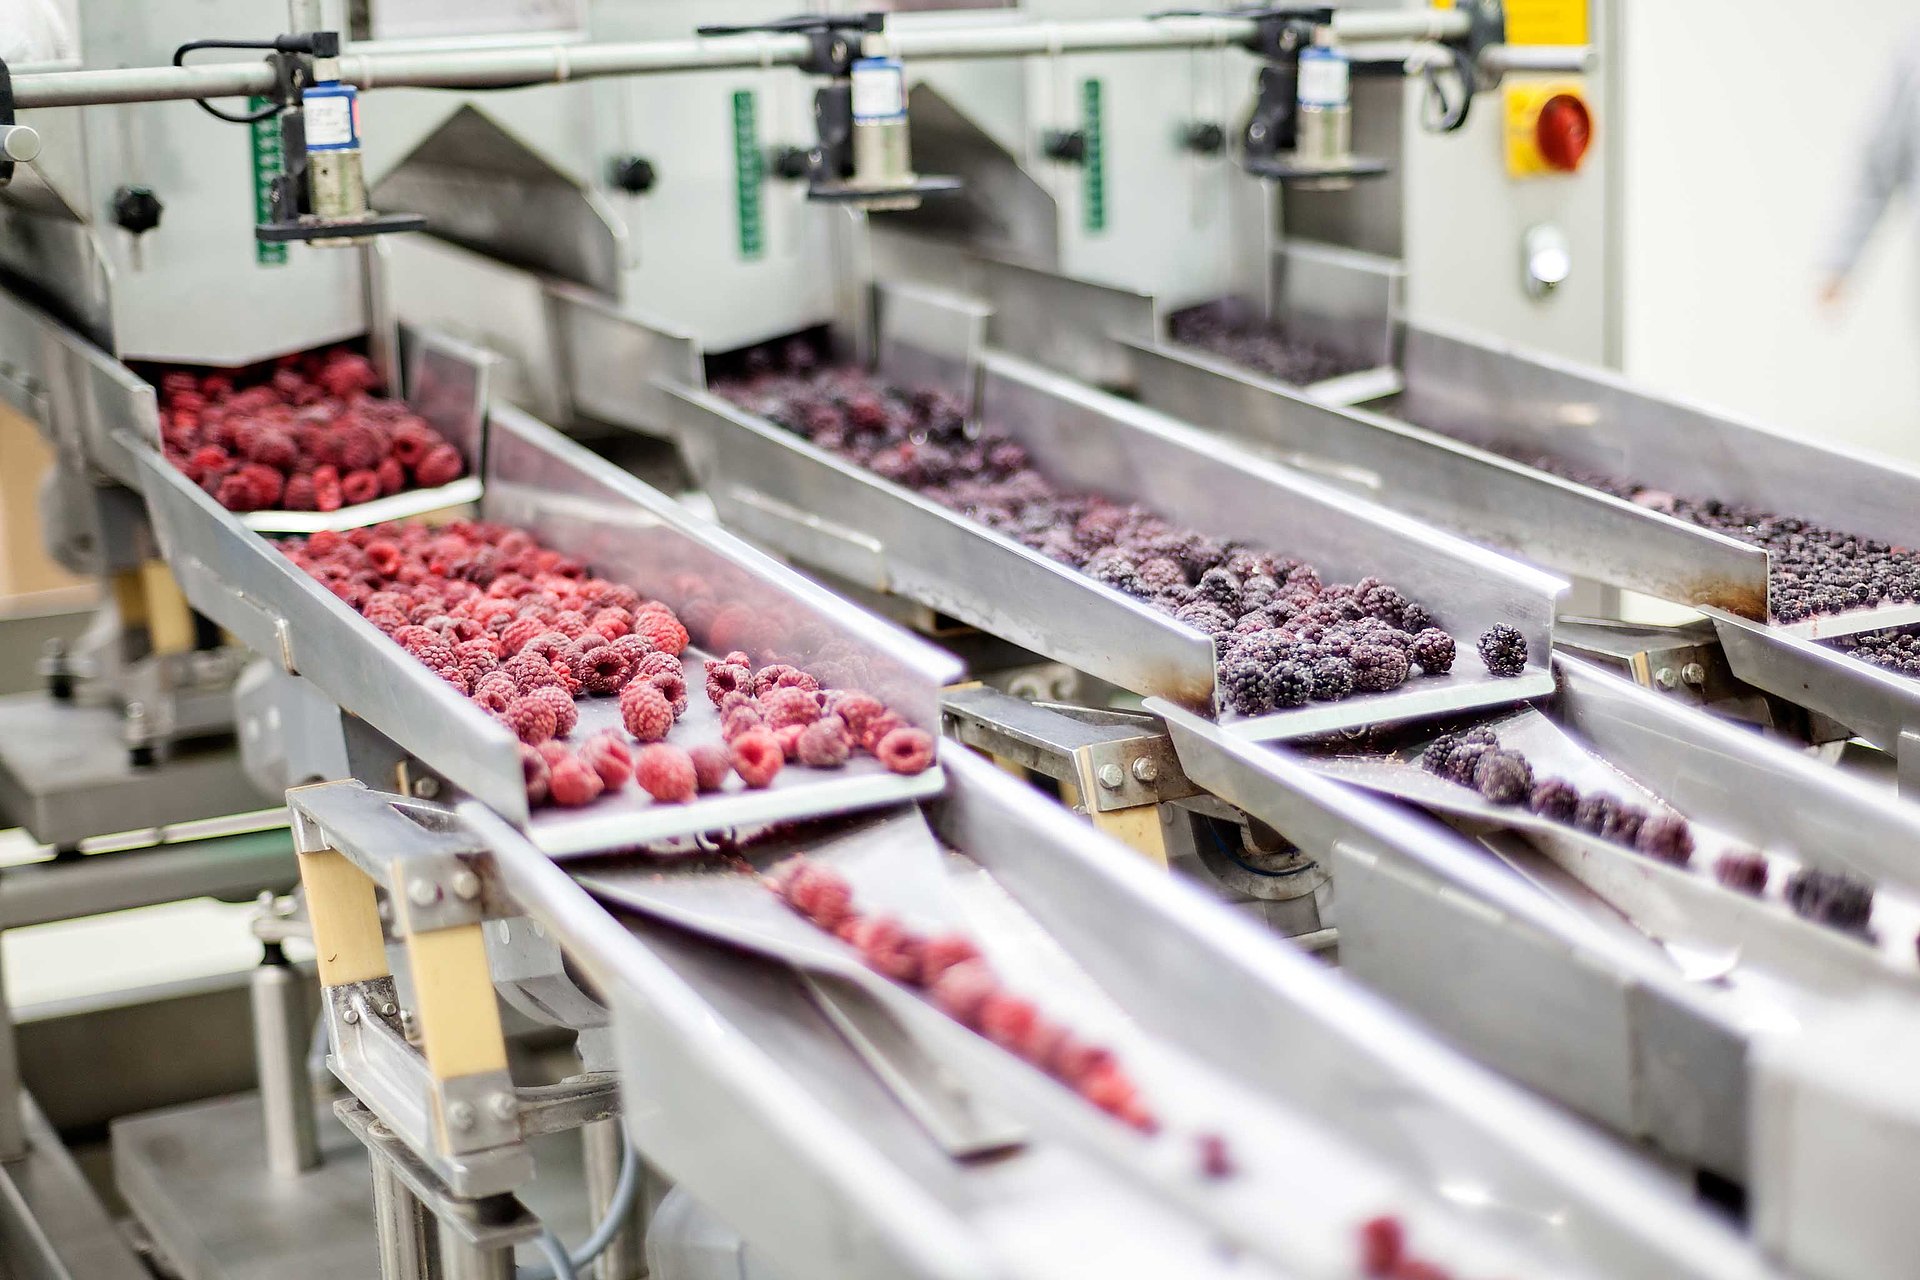 Sorting frozen berries on an assembly line